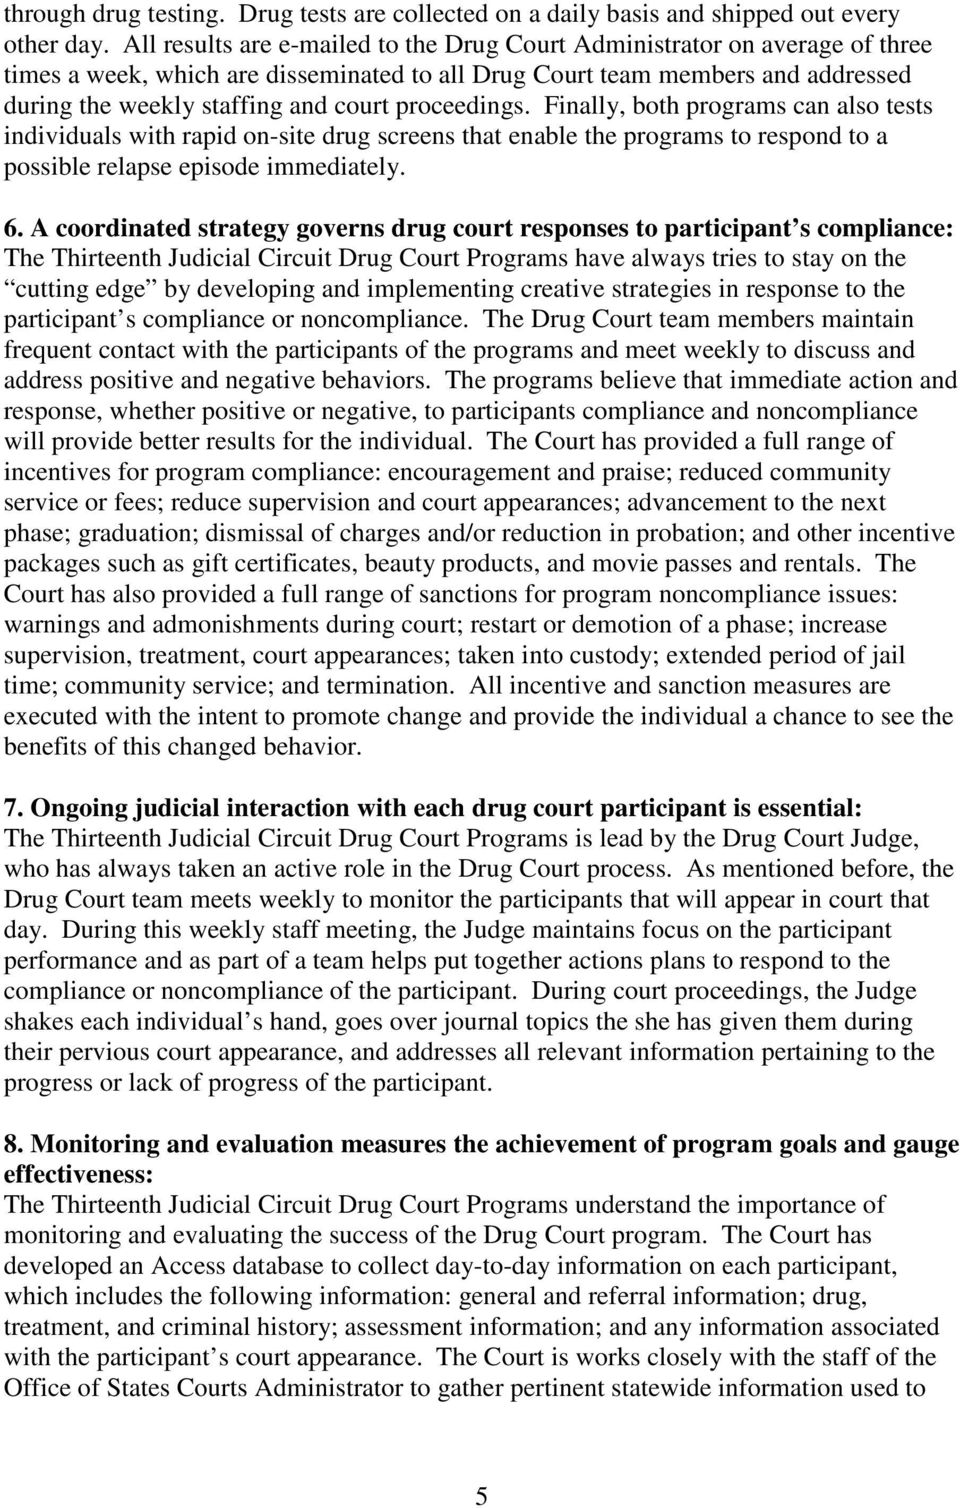 proceedings. Finally, both programs can also tests individuals with rapid on-site drug screens that enable the programs to respond to a possible relapse episode immediately. 6.